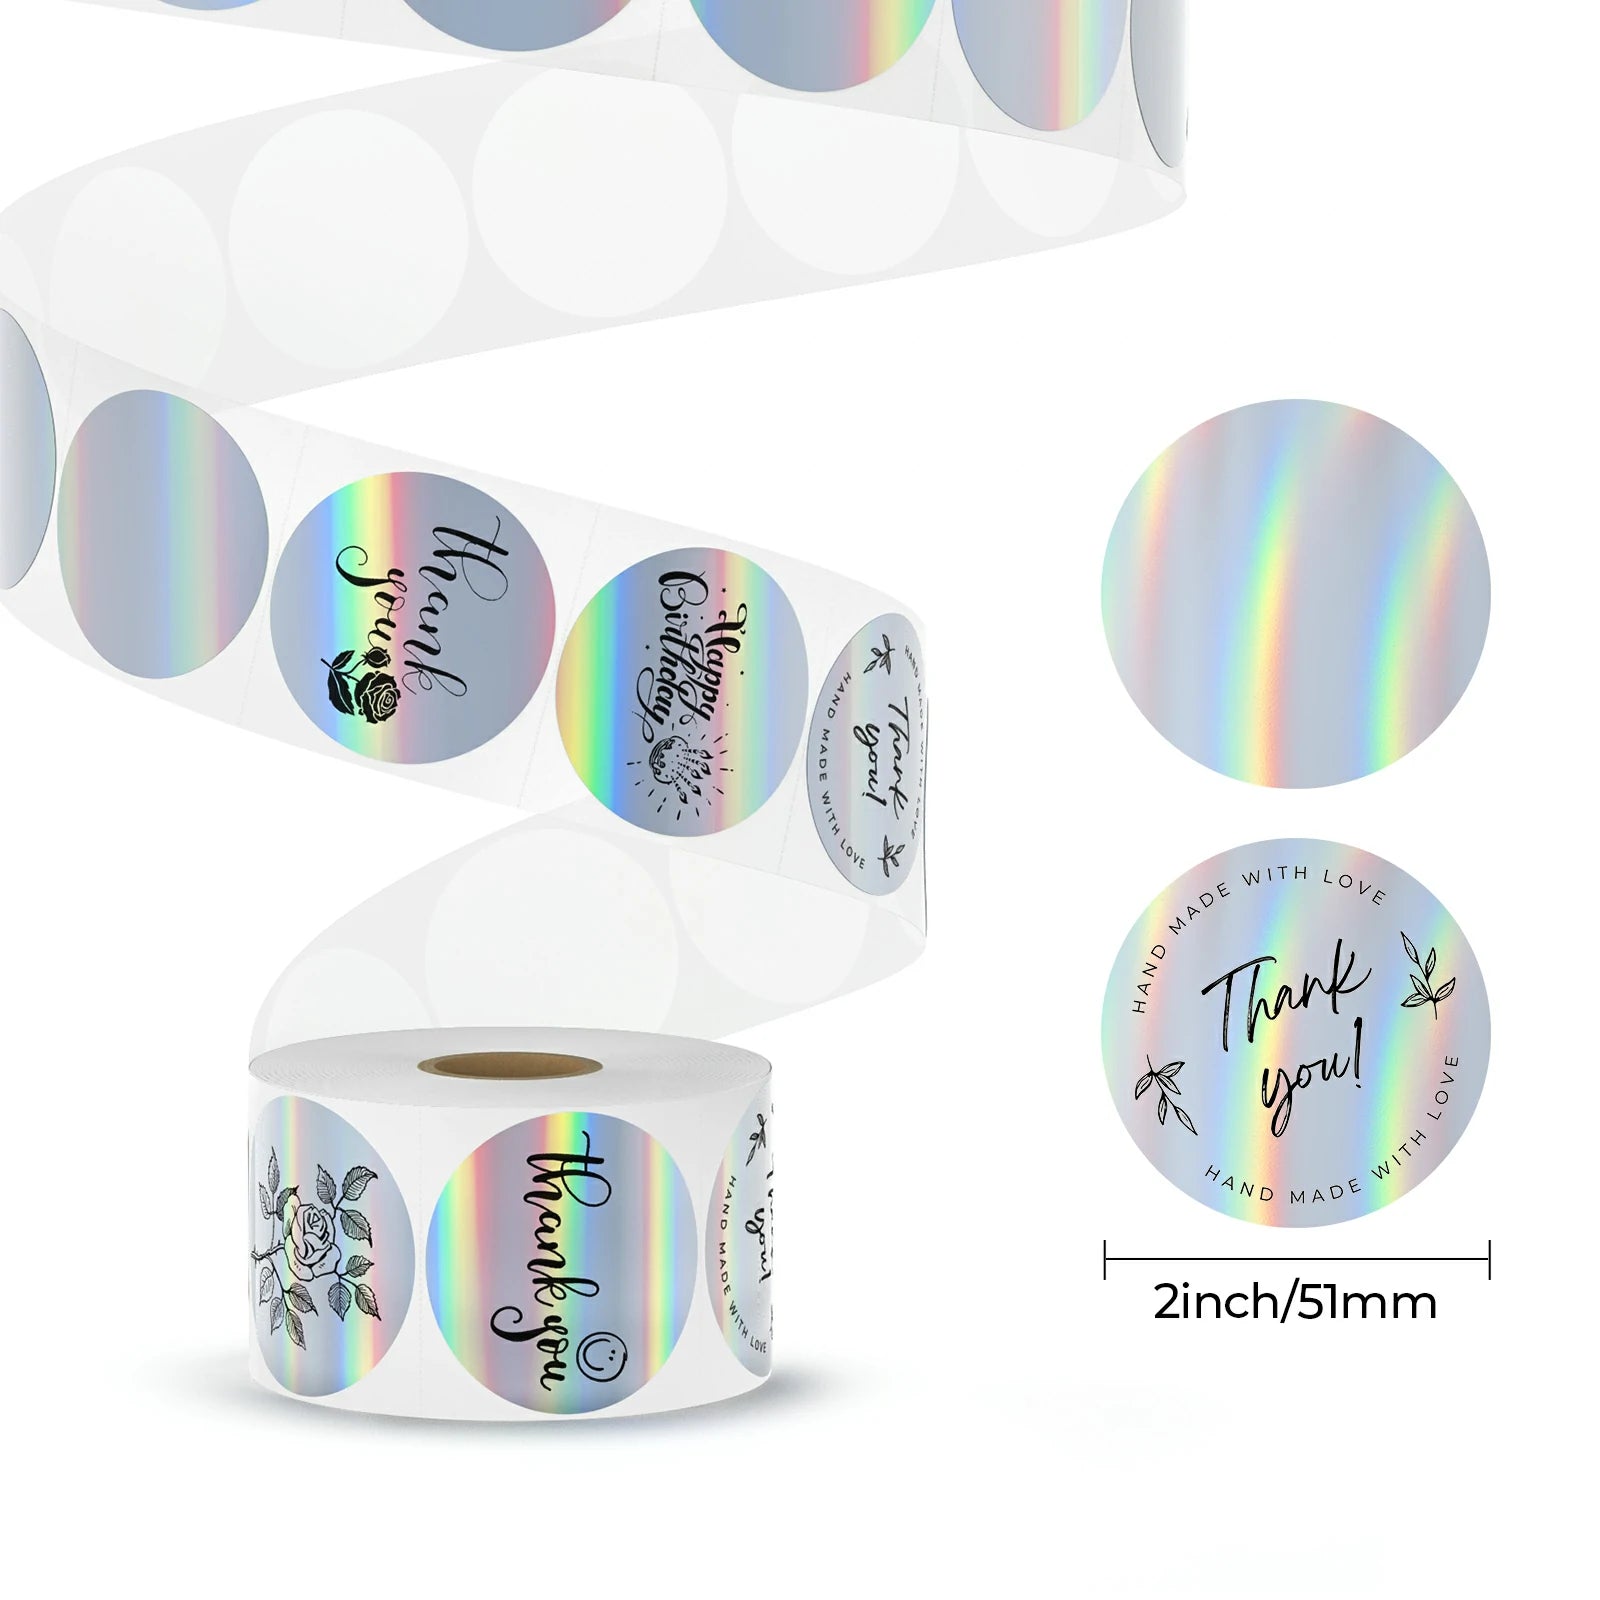 MUNBYN holographic circle thermal labels are 2 inch x 2 inch.